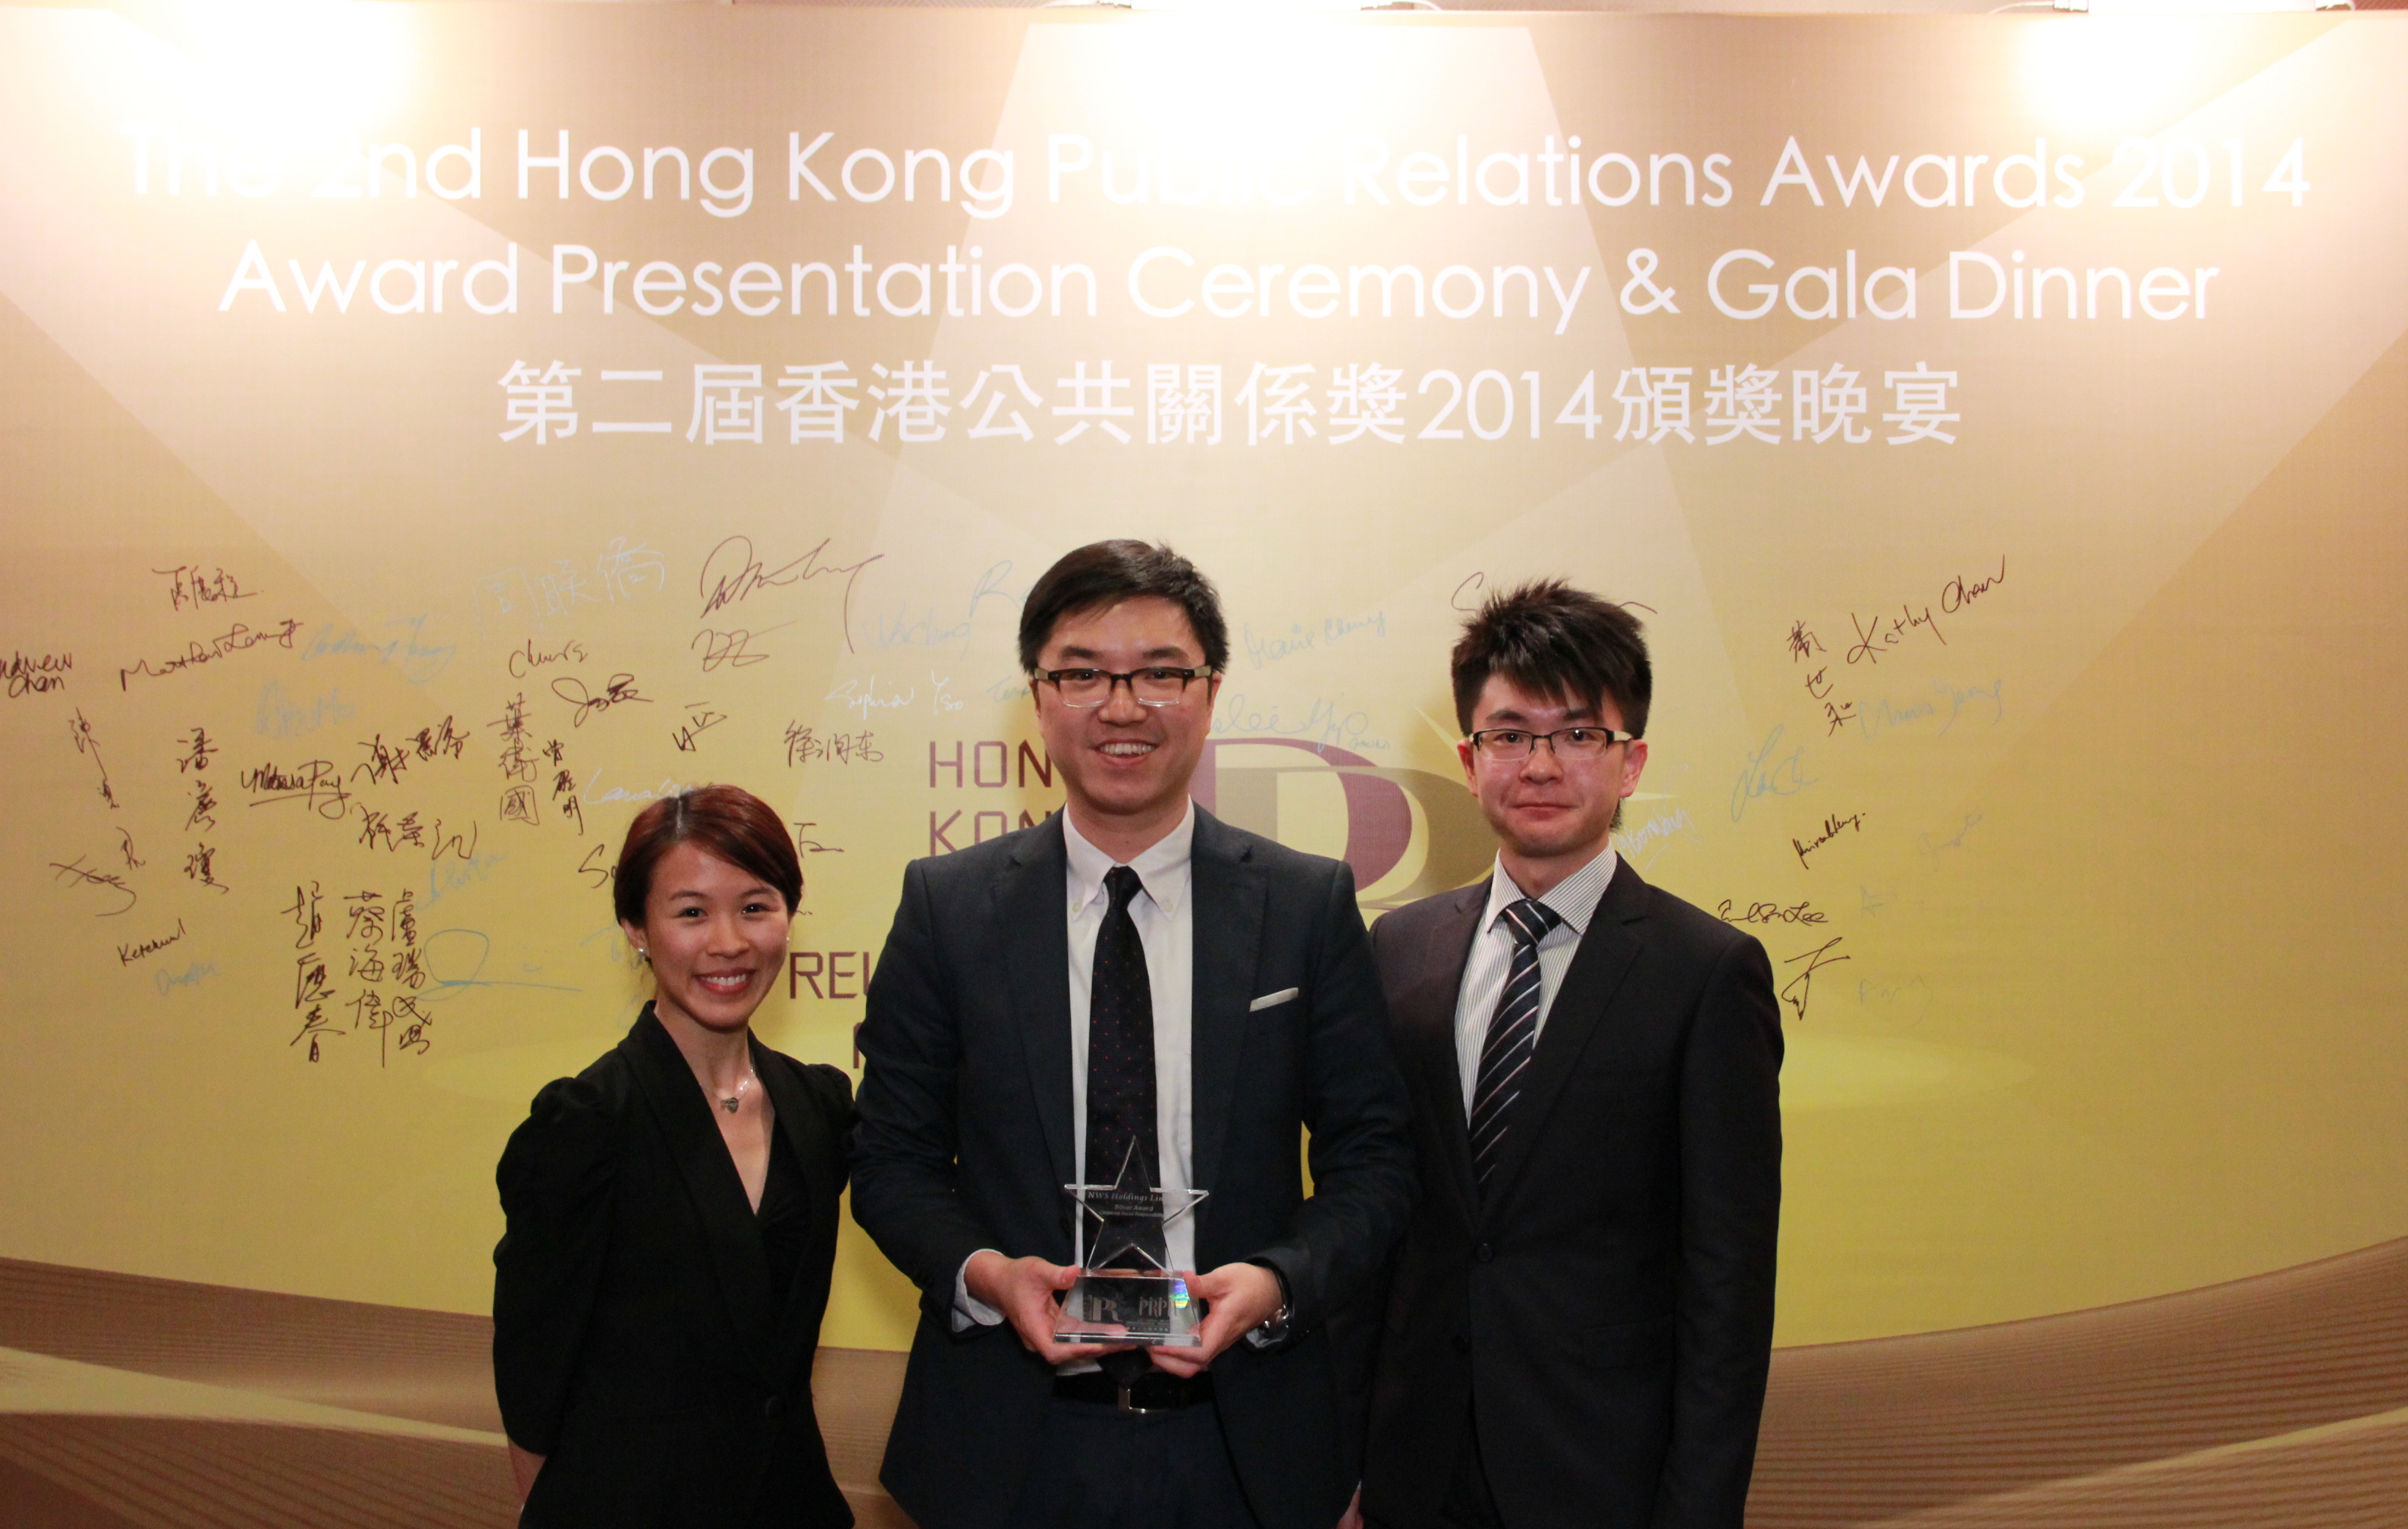 NWS Holdings garners Public Relations Awards (Chinese version only)